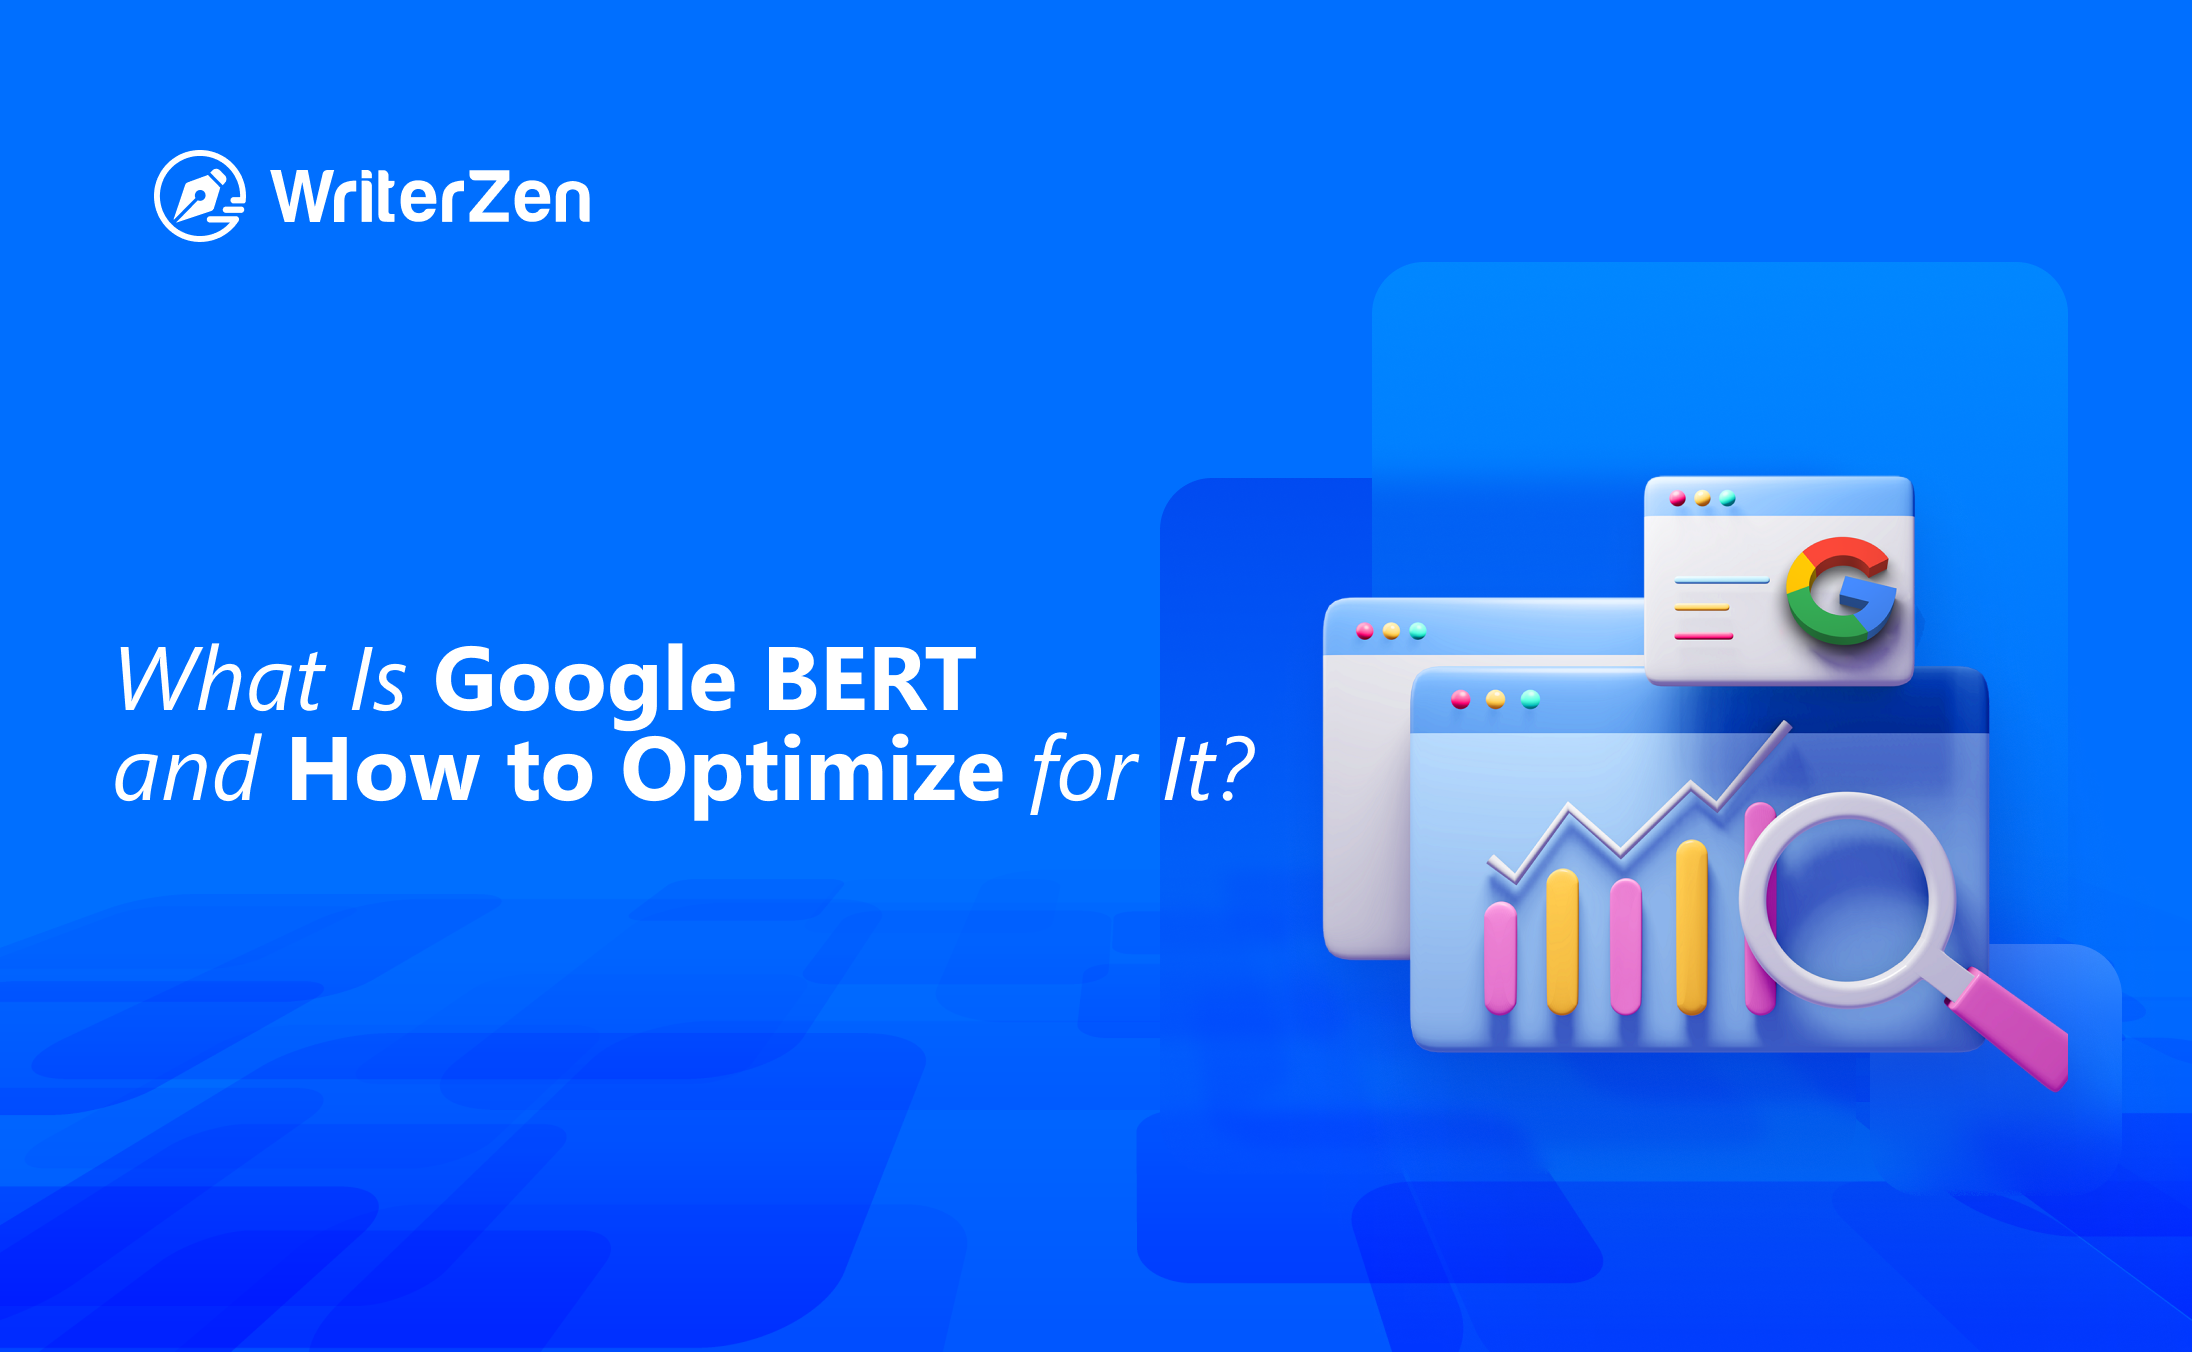 What Is Google BERT and How to Optimize for It?